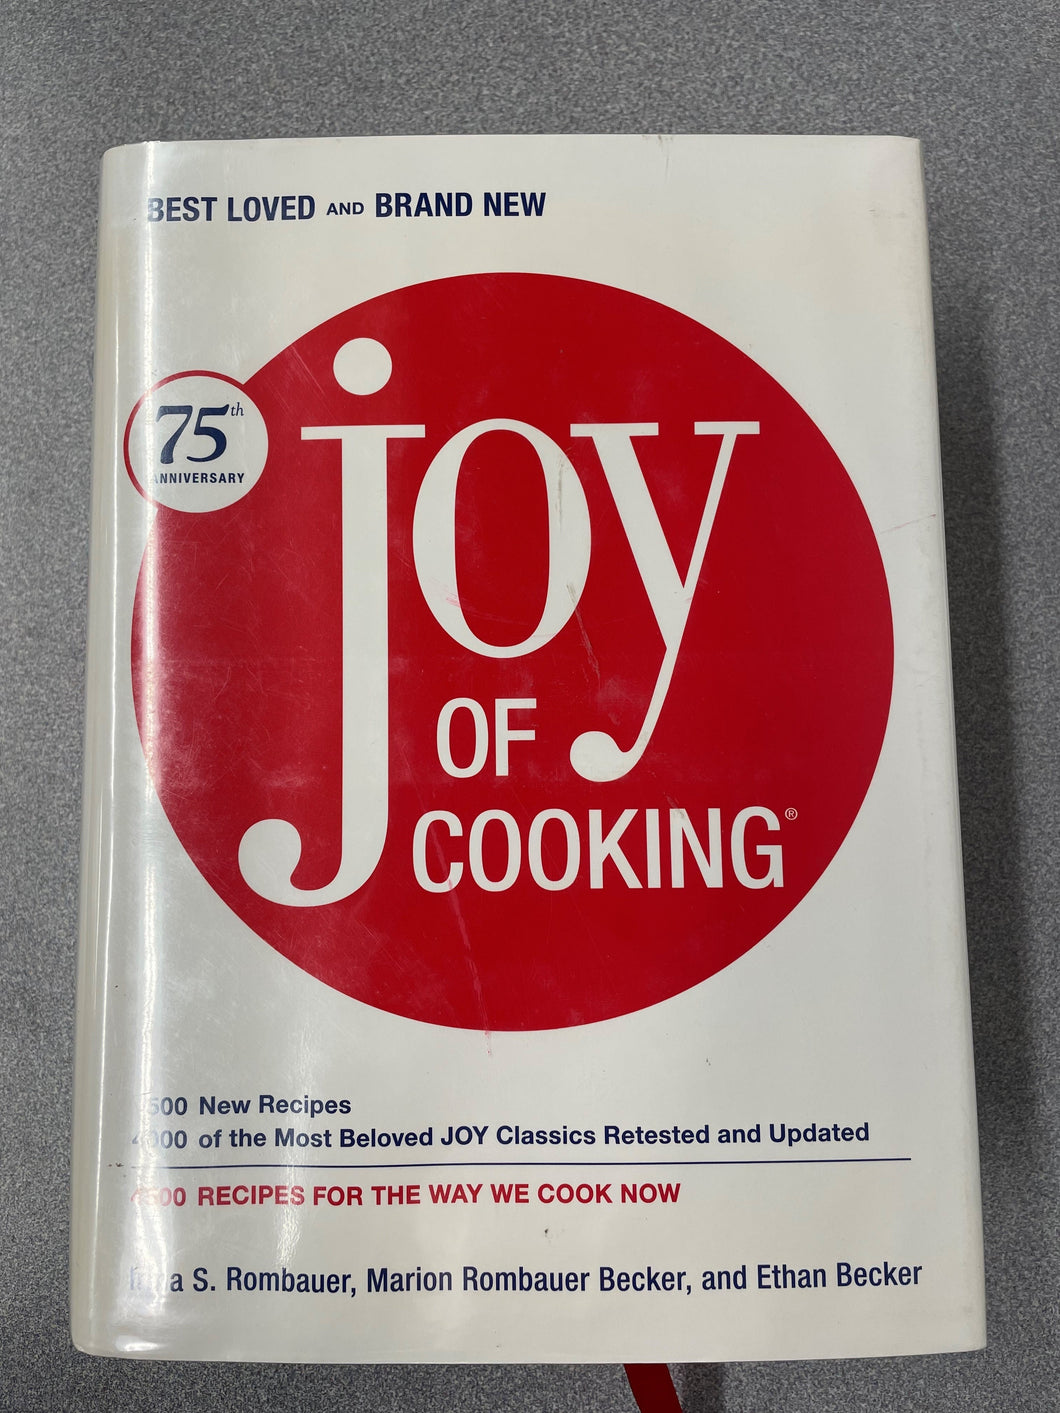 CO Joy of Cooking 75th Anniversary Edition, Rombauer, Irma, et al [2006] N 8/23